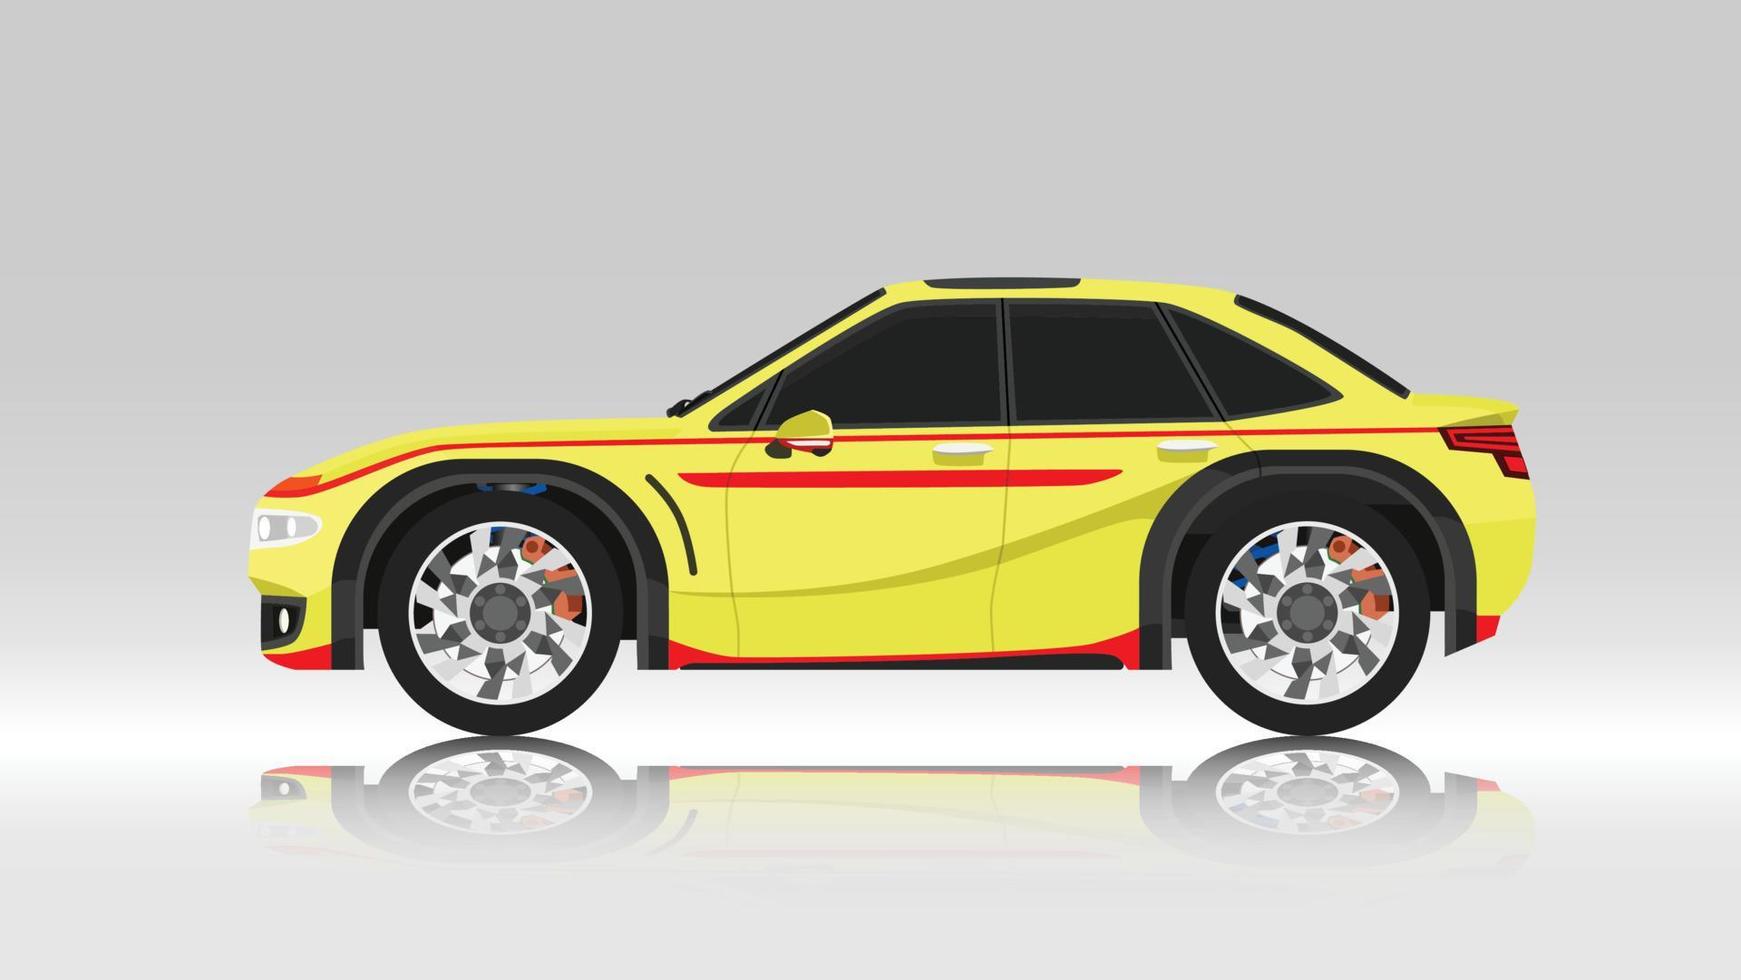 Concept vector illustration of sedan car yellow color with red line design. with shadow of car on reflected from the ground below. And isolated white background.